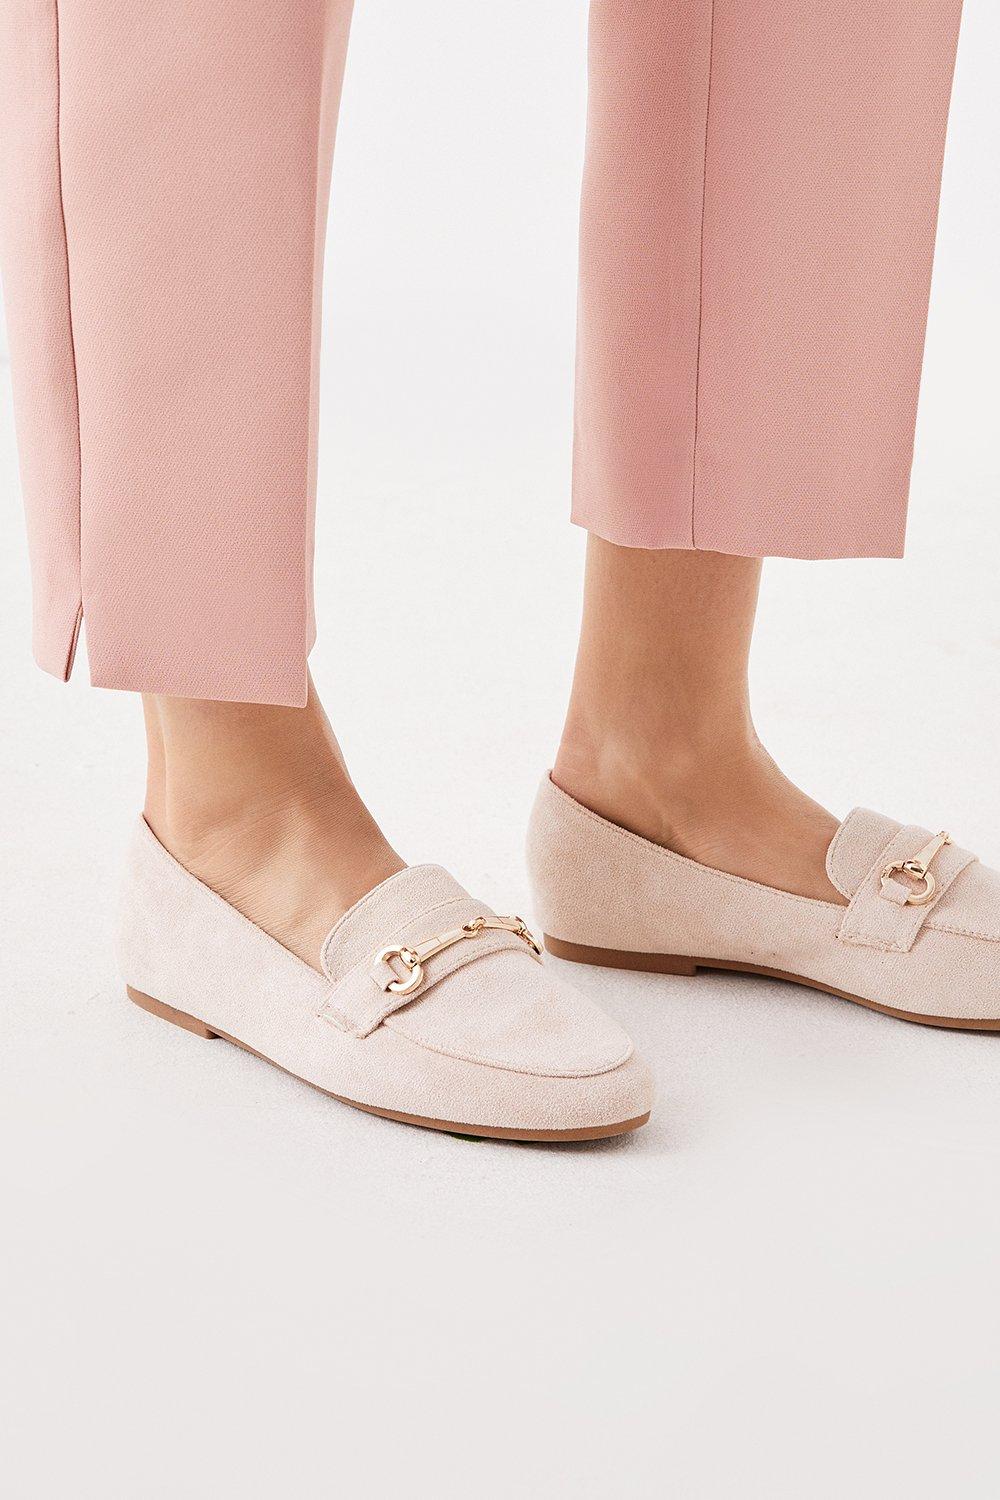 Women’s Lily Round Toe Trim Loafers - blush - 5